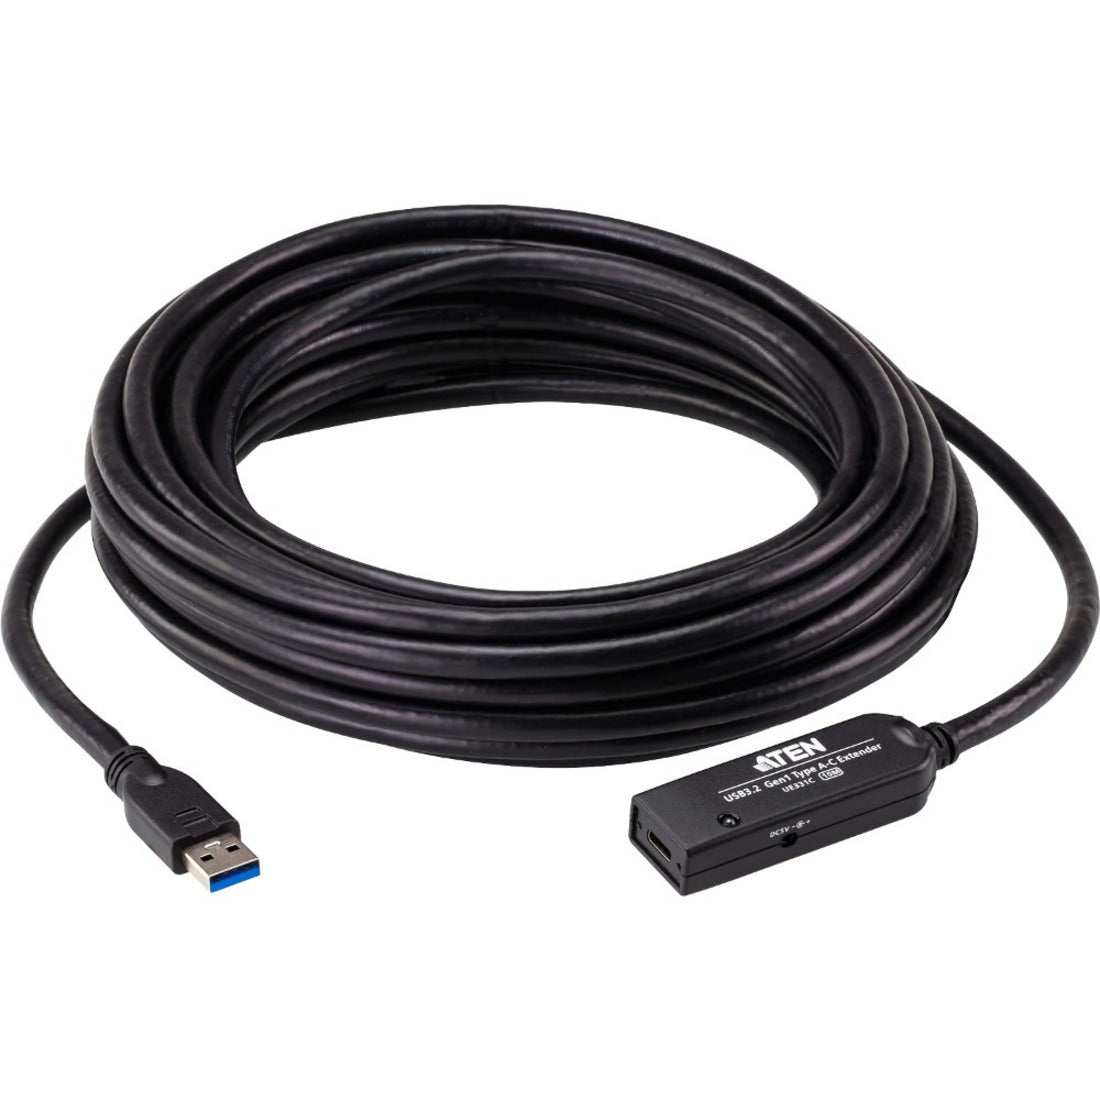 ATEN UE331C 10 M USB 3.2 Gen1 Extender Cable, Plug & Play, Flexible, 32.81 ft Data Transfer Cable